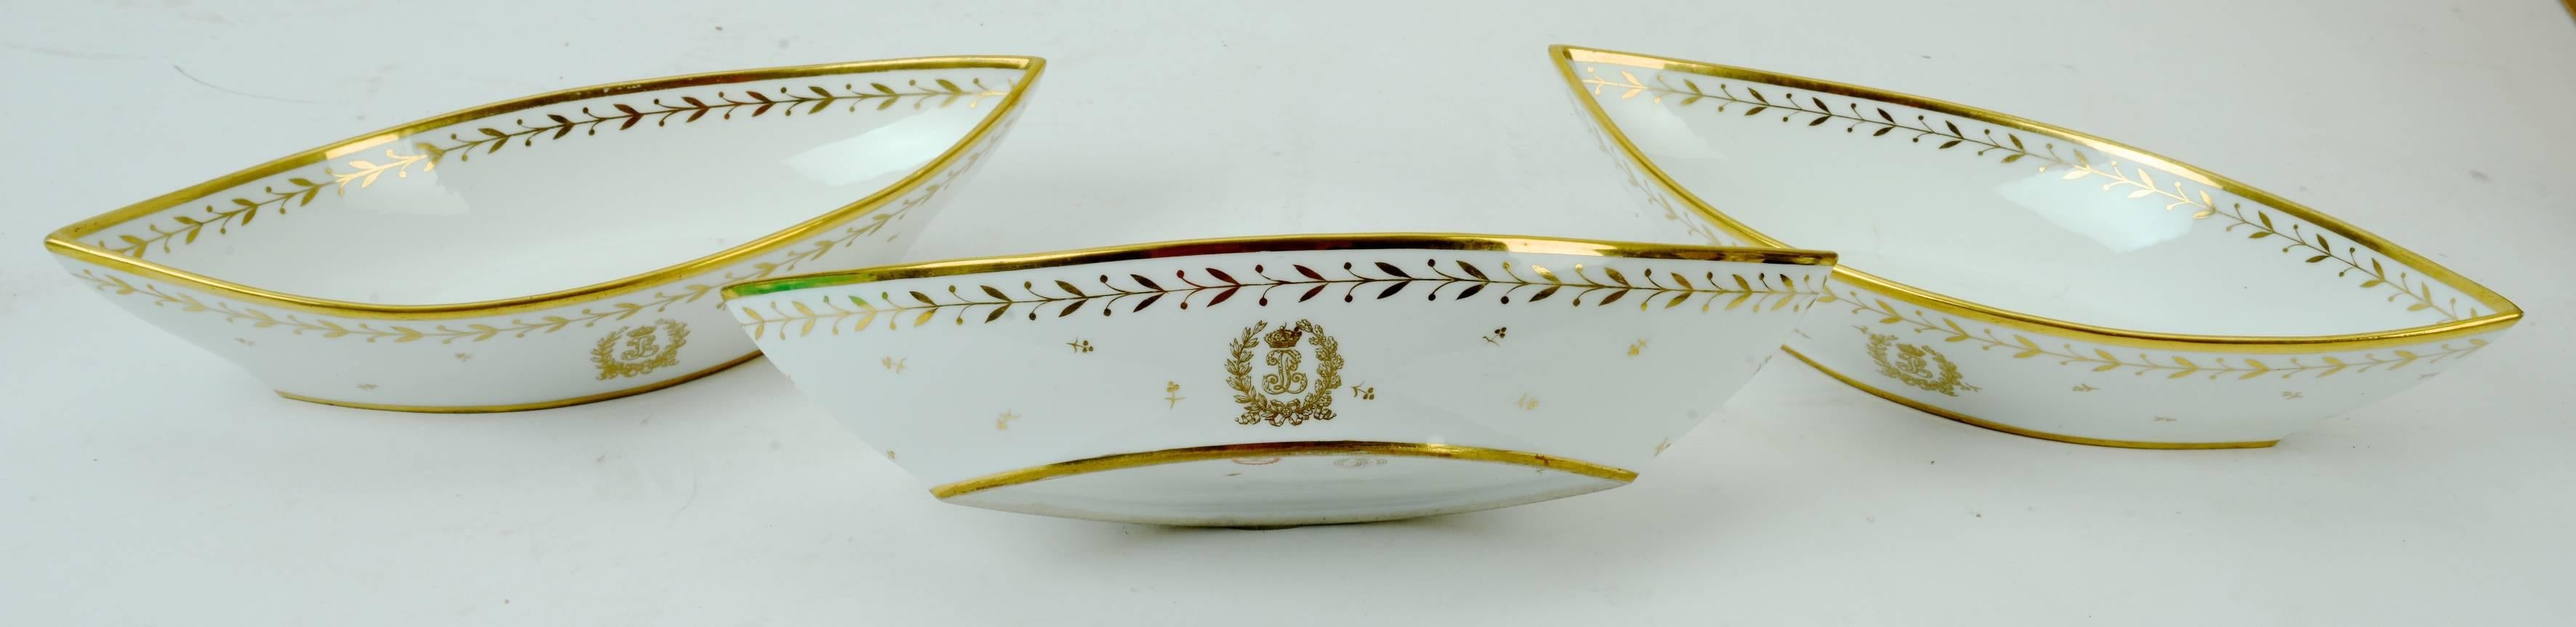 Set of 3 Sèvres Navette Plates, Louis Philippe I From the Château de Compiègne In Good Condition In valatie, NY